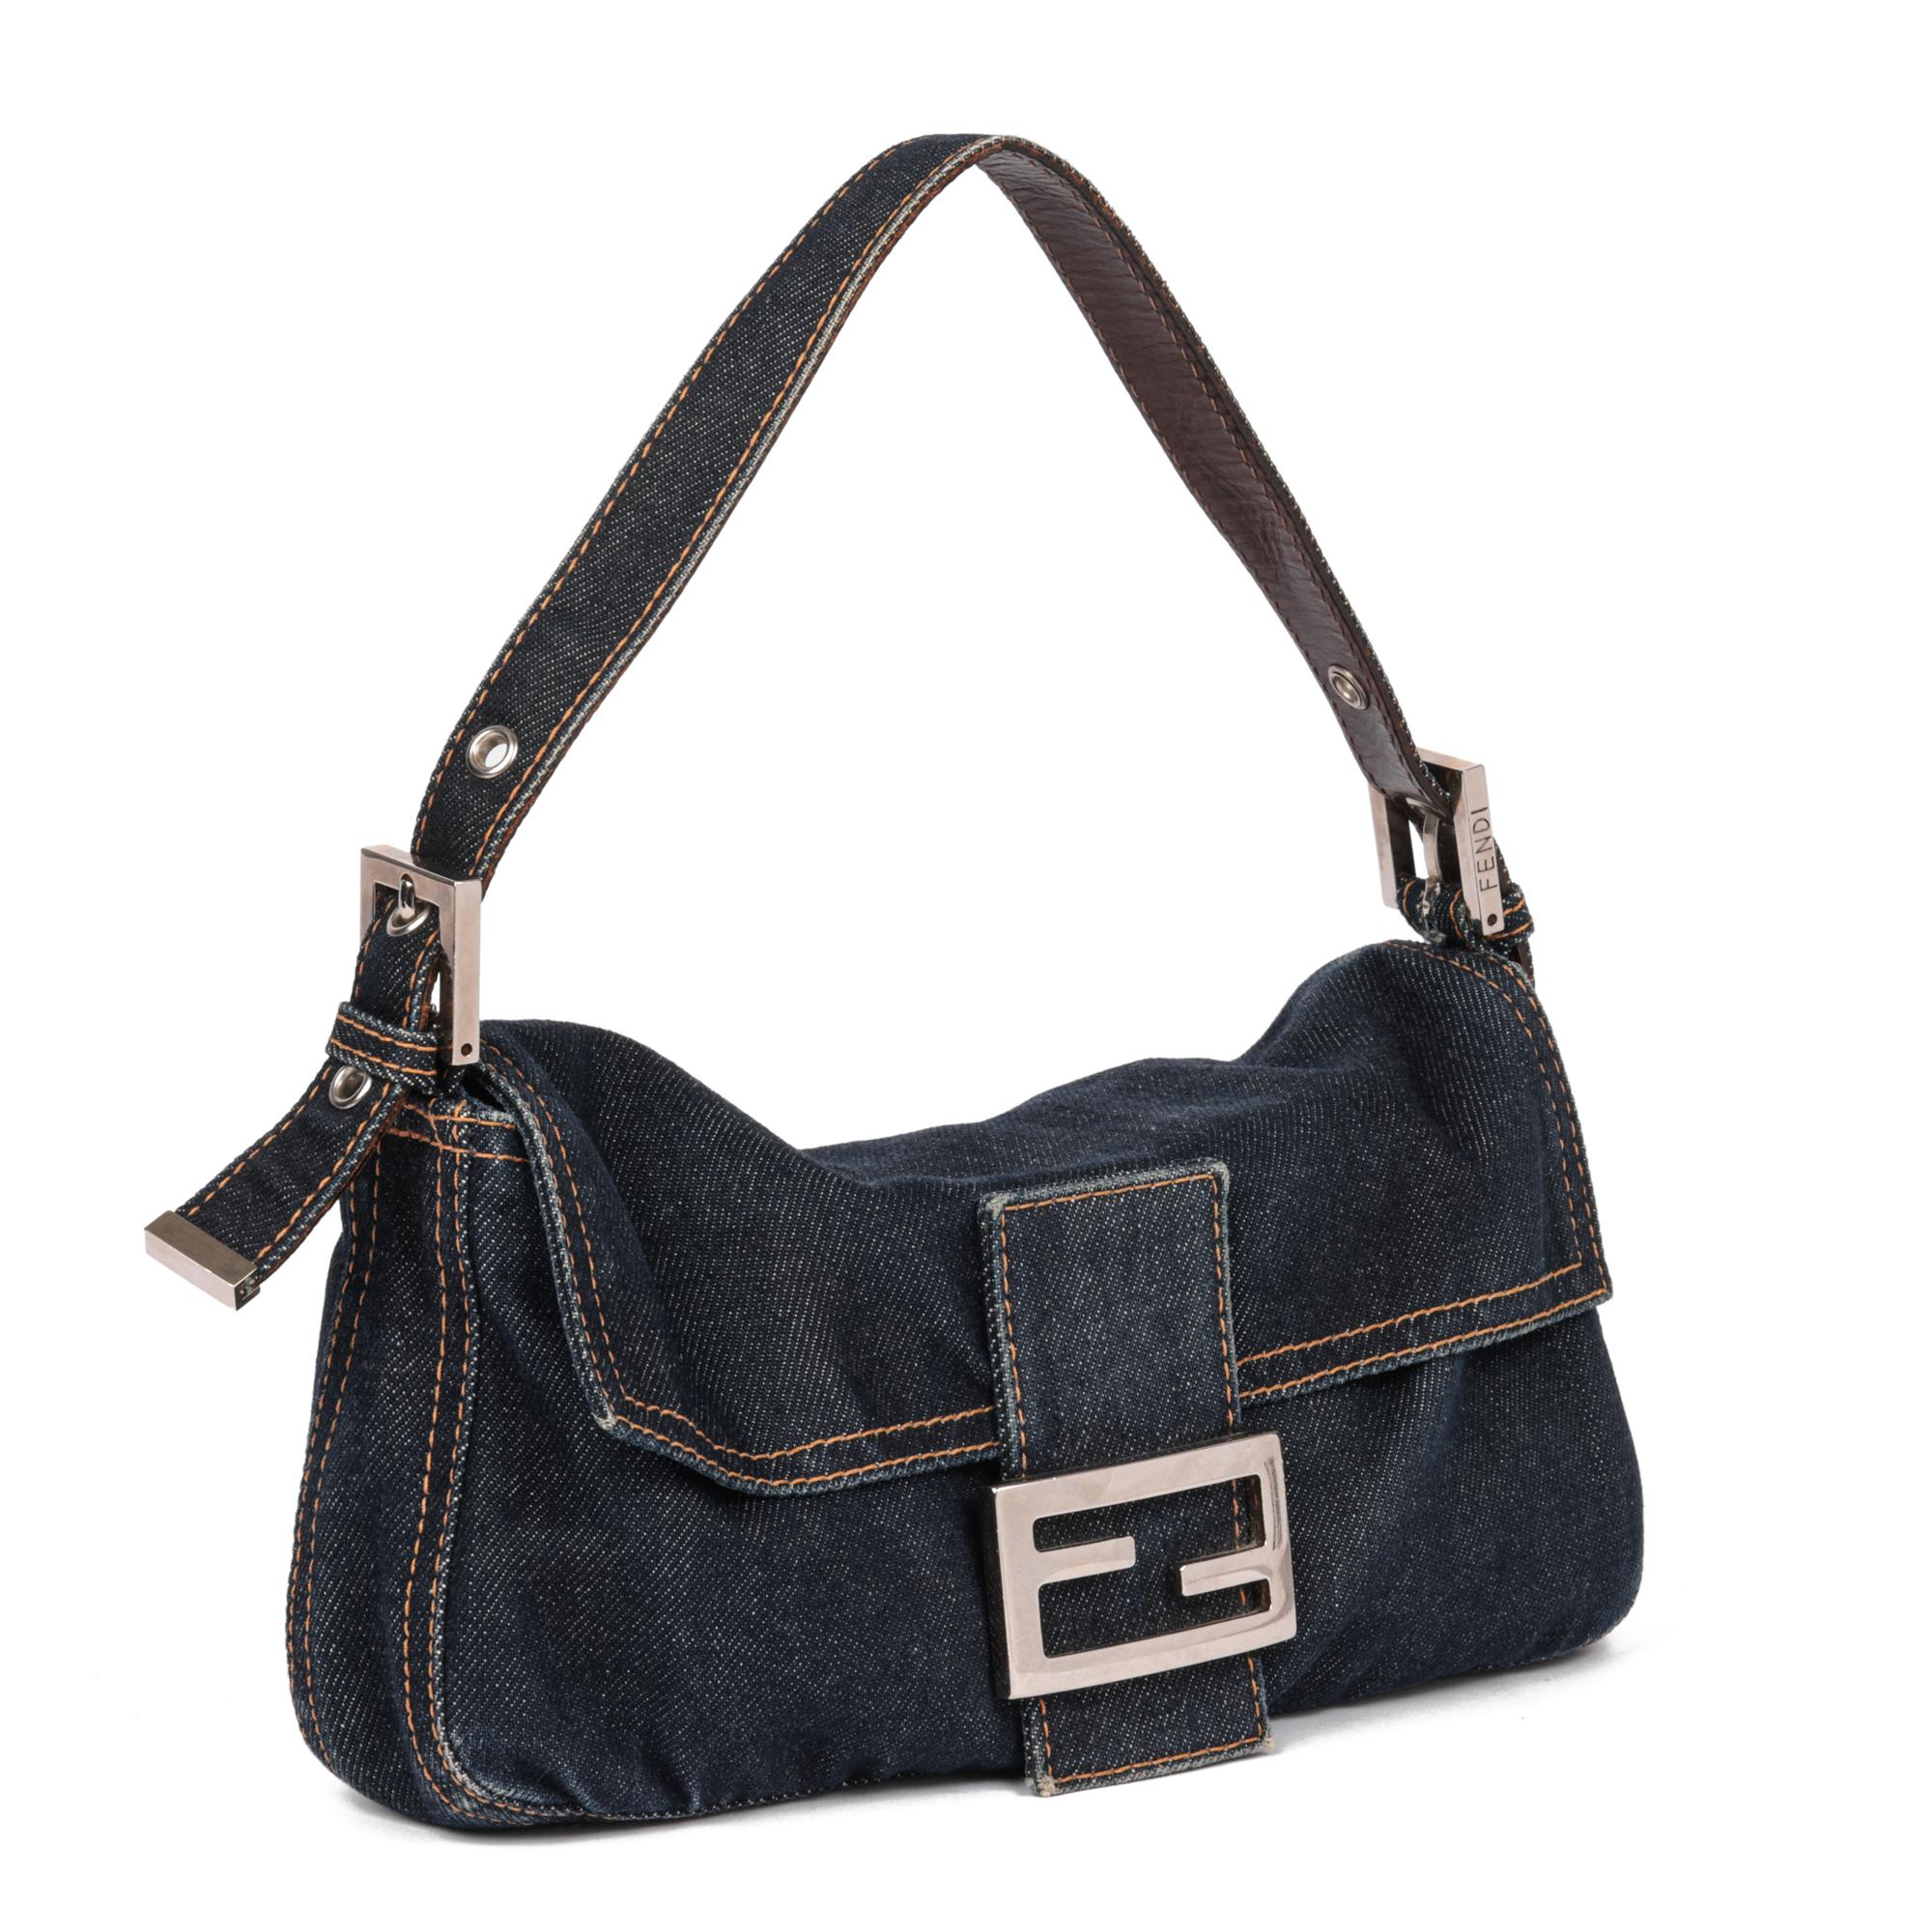 FENDI
Blue Denim & Brown Calfskin Leather Vintage Baguette

Xupes Reference: HB5139
Serial Number: 2308-26424-093
Age (Circa): 2000
Authenticity Details: Date Stamp (Made in Italy)
Gender: Ladies
Type: Top Handle, Shoulder

Colour: Blue 
Hardware: